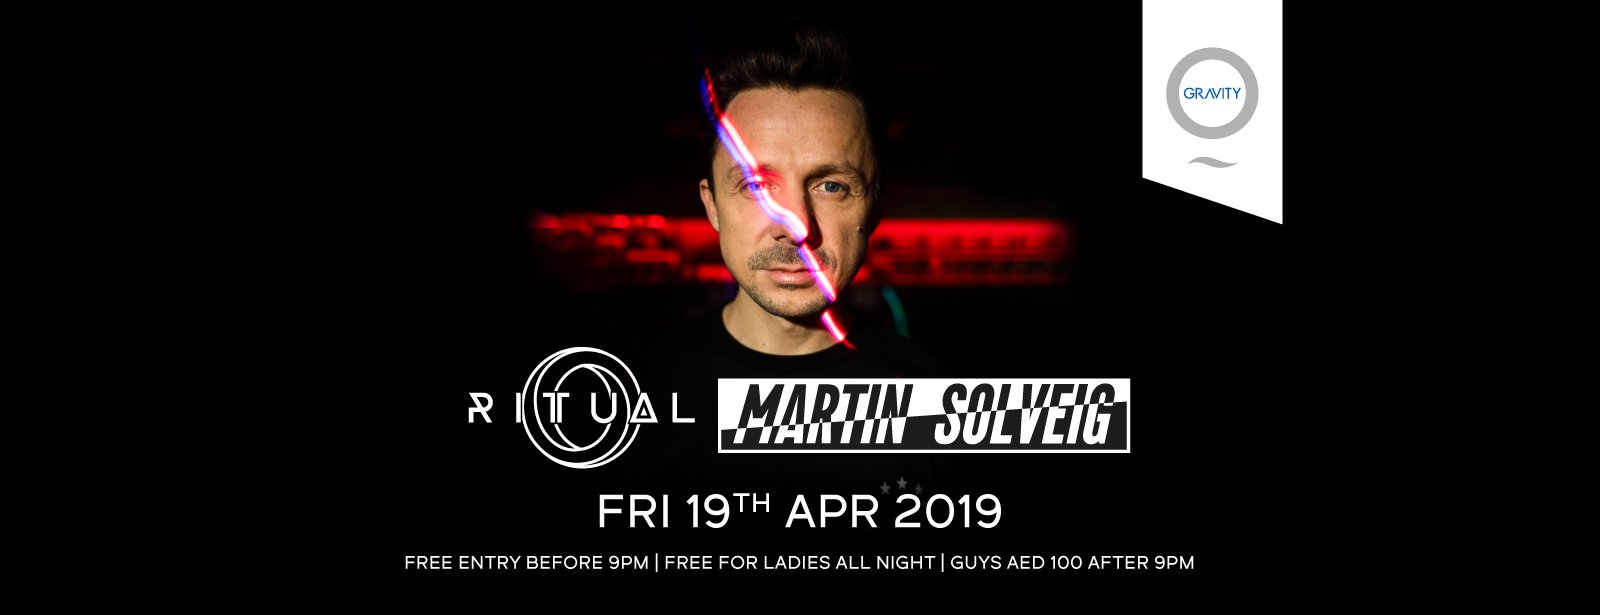 Martin Solveig at the Zero Gravity - Coming Soon in UAE